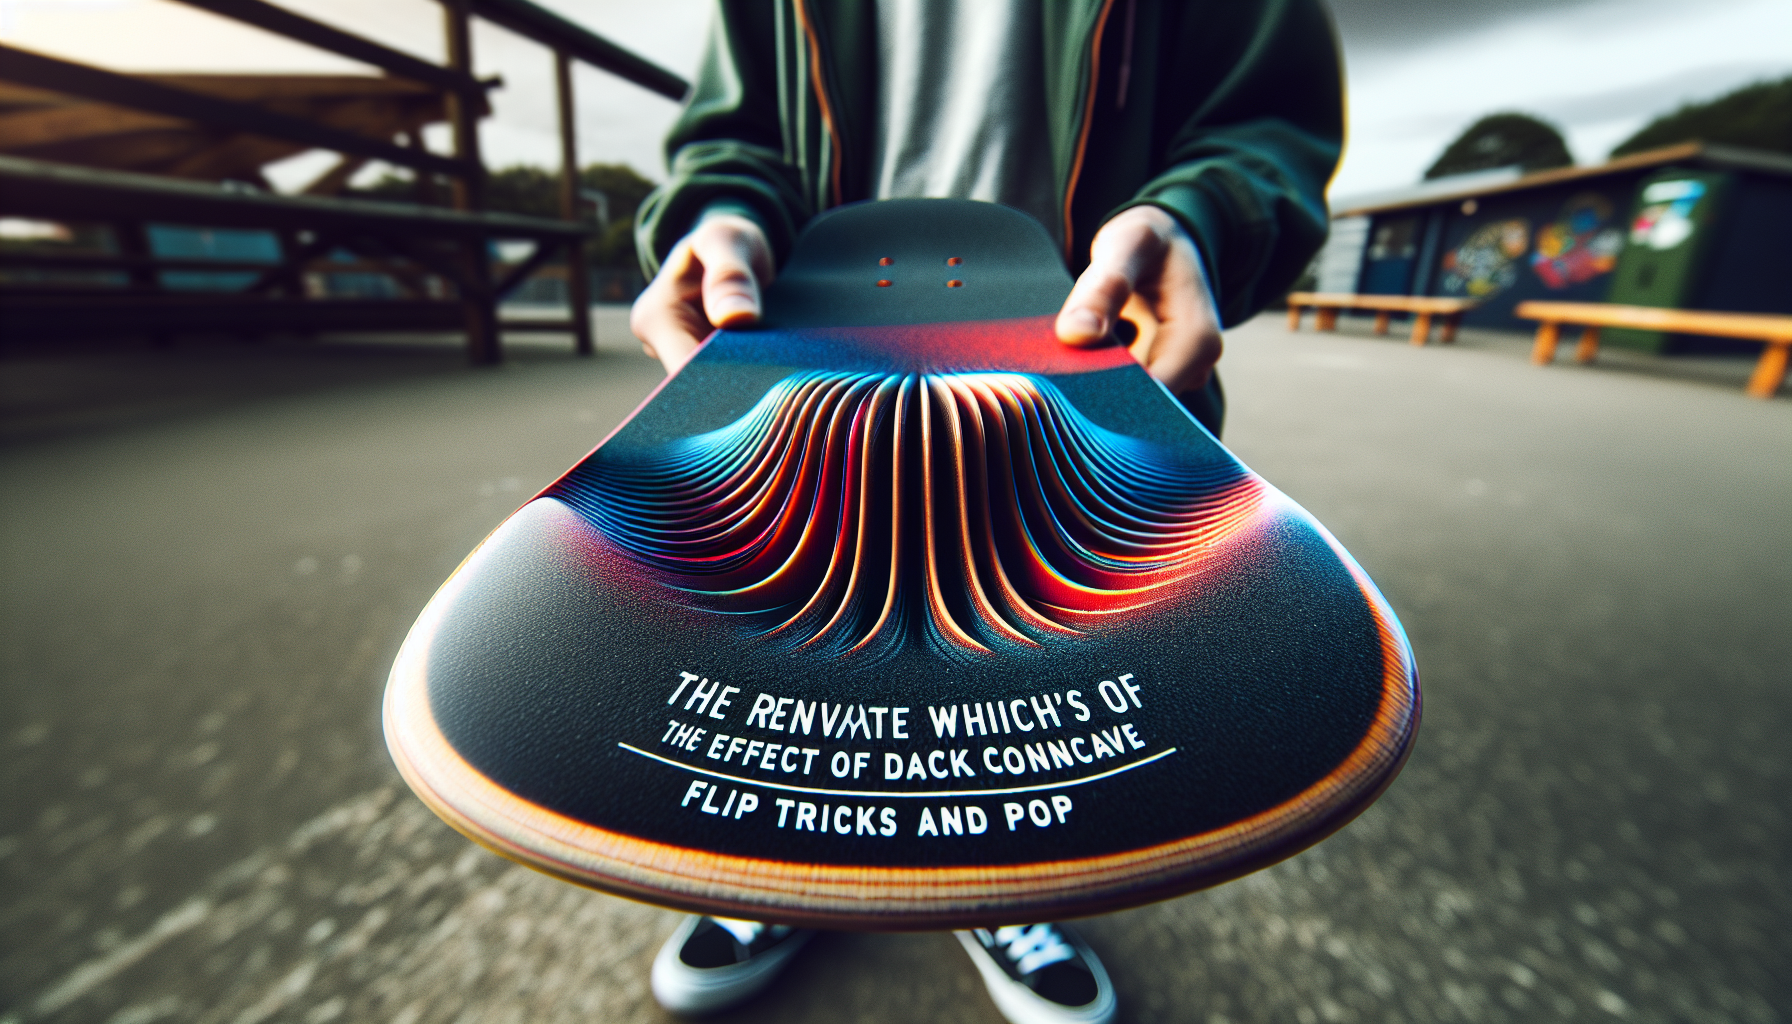 Can You Explain The Influence Of Deck Concave On Flip Tricks And Pop?